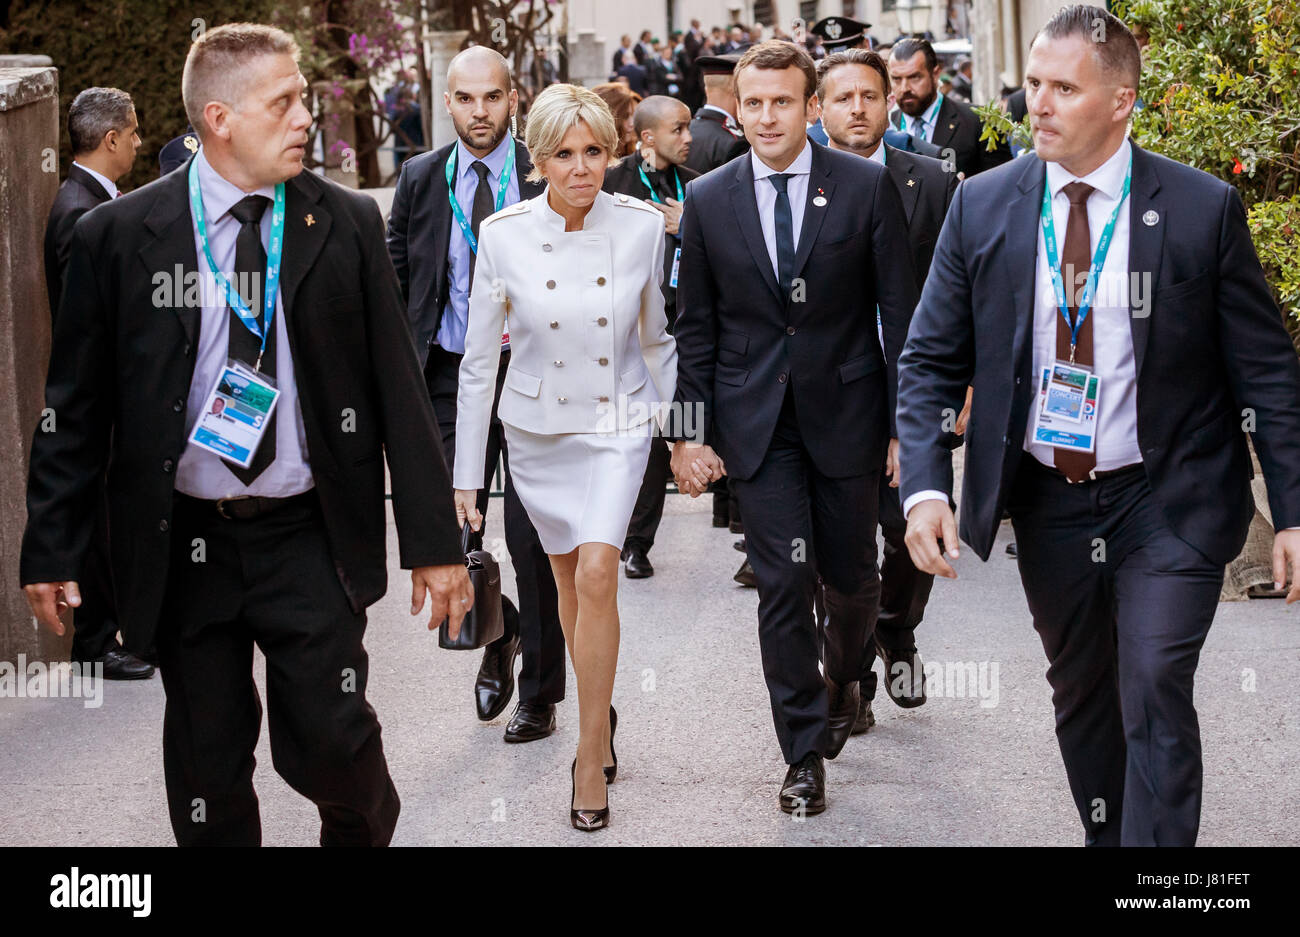 Taormina, Italy. 26th May, 2017. France's president Emmanuel Macron and his wife Brigitte can be seen on their way to a concert at the Greek Theatre in Taormina, Italy, 26 May 2017. The heads of goverment of the G7 member states have gathered for the summit to be held from 26 May to 27 May 2017. Photo: Michael Kappeler/dpa/Alamy Live News Stock Photo